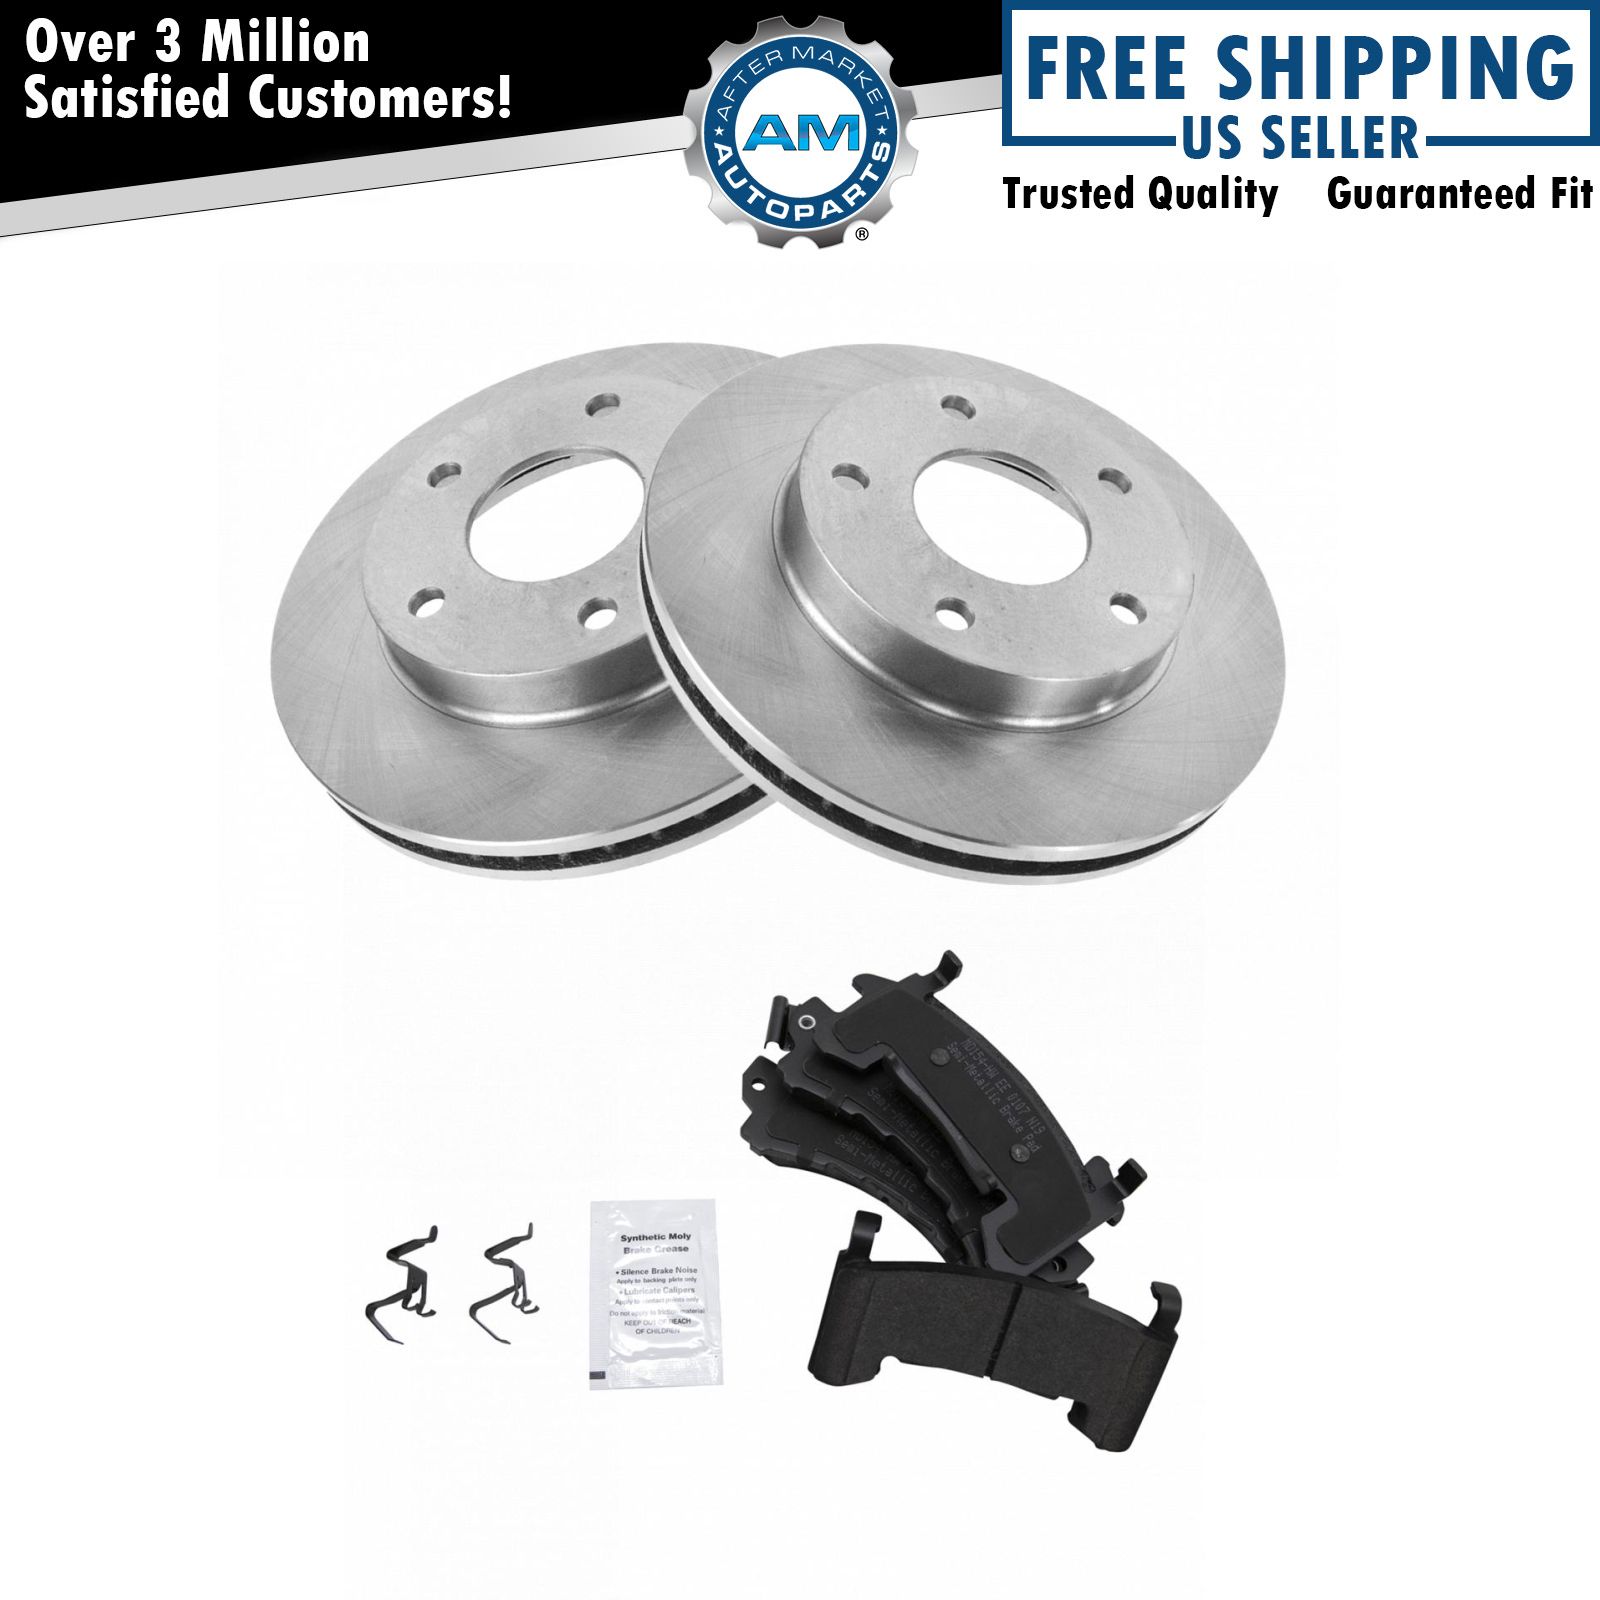 Brake Pad & Rotor Kit Metallic Front or Rear for Cadillac Chevy GMC New